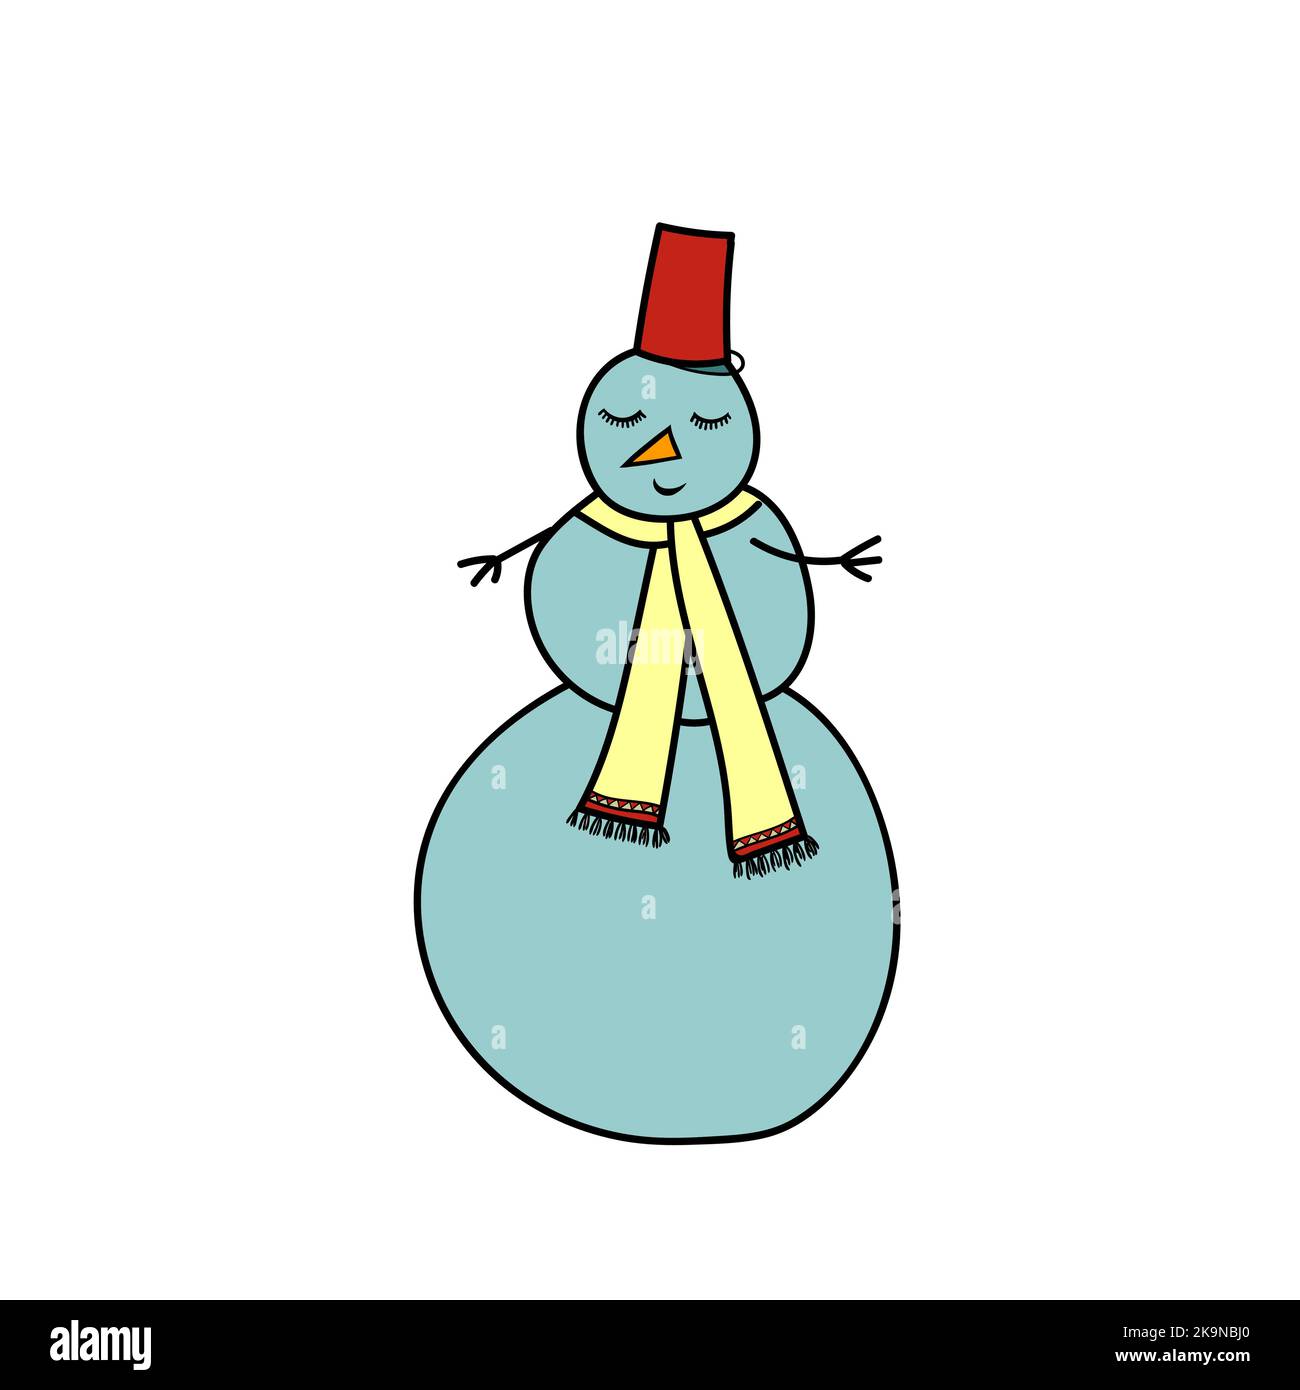 Funny snowman. Colorful image. Illustration in cartoon style for stickers, cards, invitations, stationery design Stock Vector